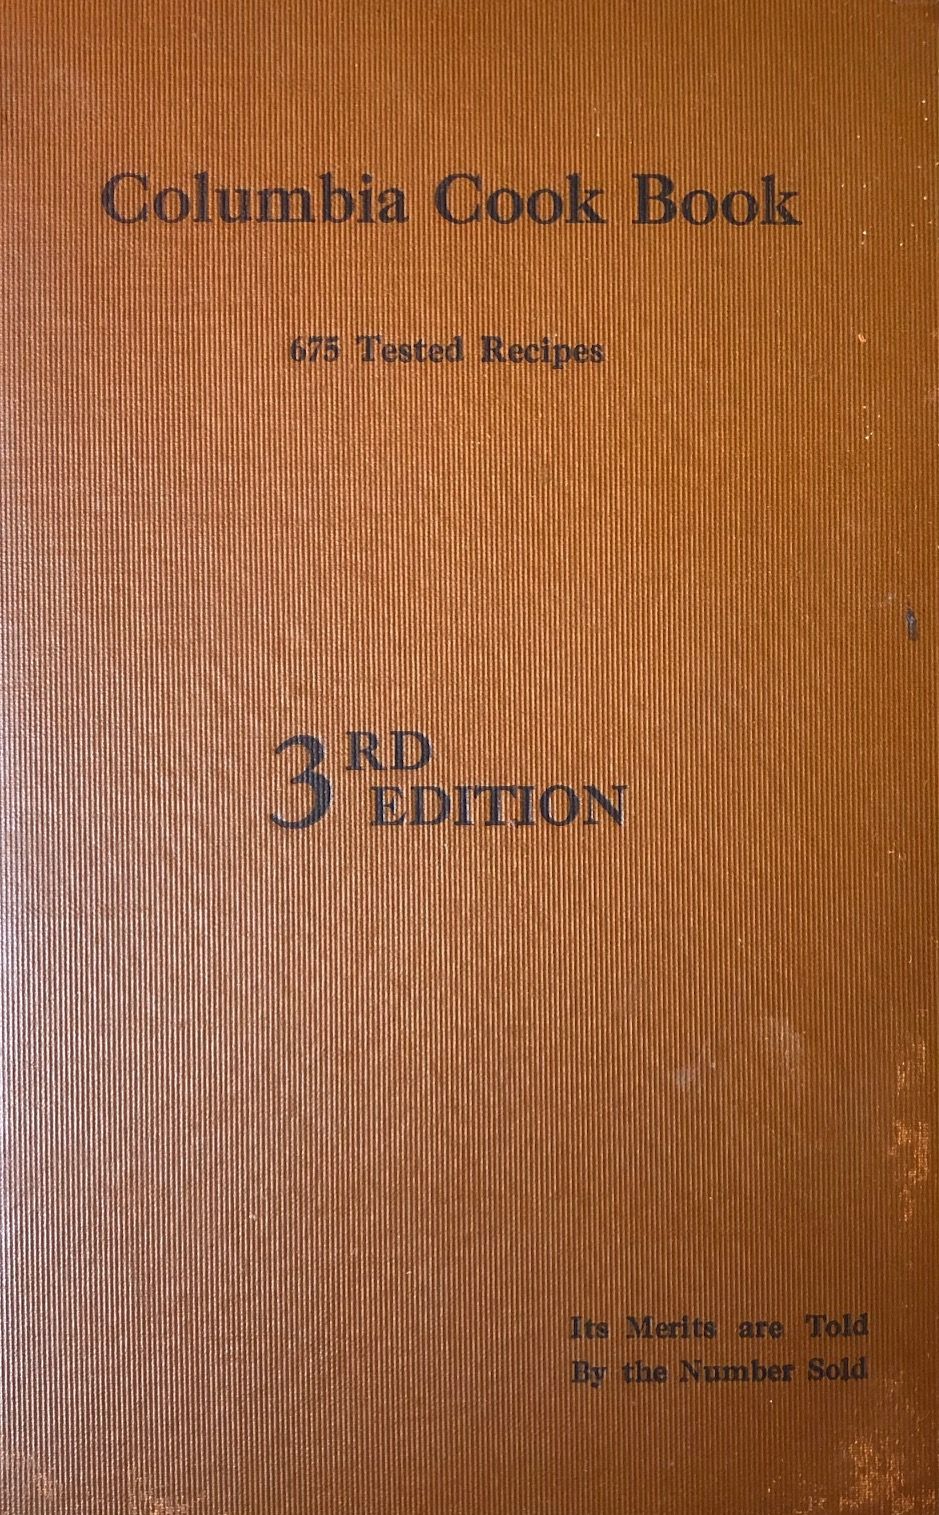 (Southern - Tennessee) Ladies' Auxiliary of the First Baptist Church of Columbia, Tennessee. Columbia Cook Book: 675 Tested Recipes.